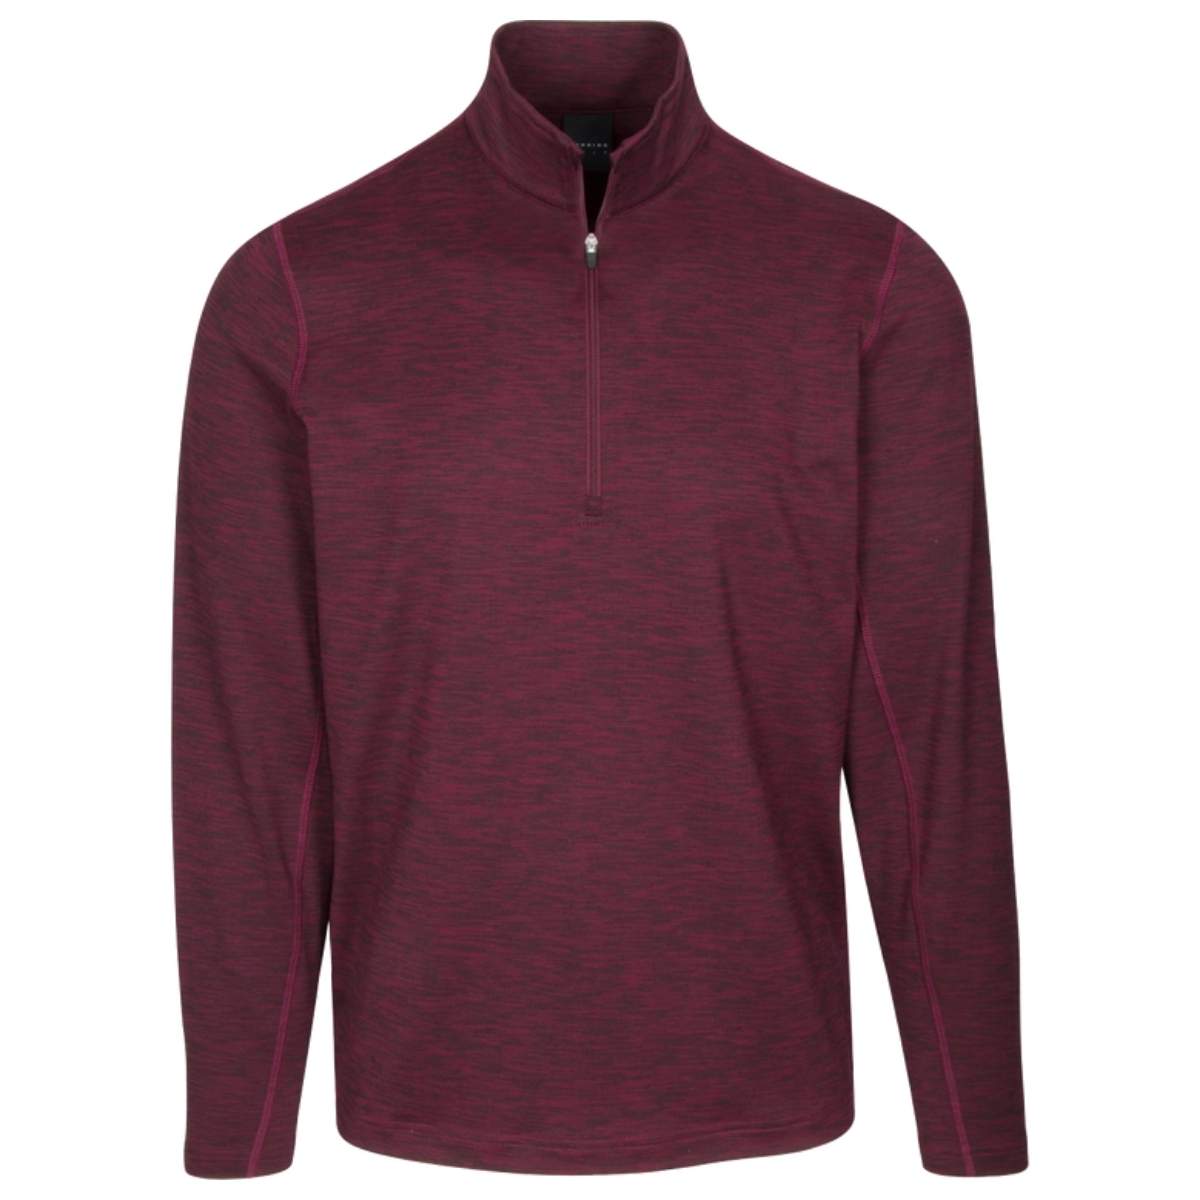 Dunning Huntly Stretch 1/4 Zip Pullover